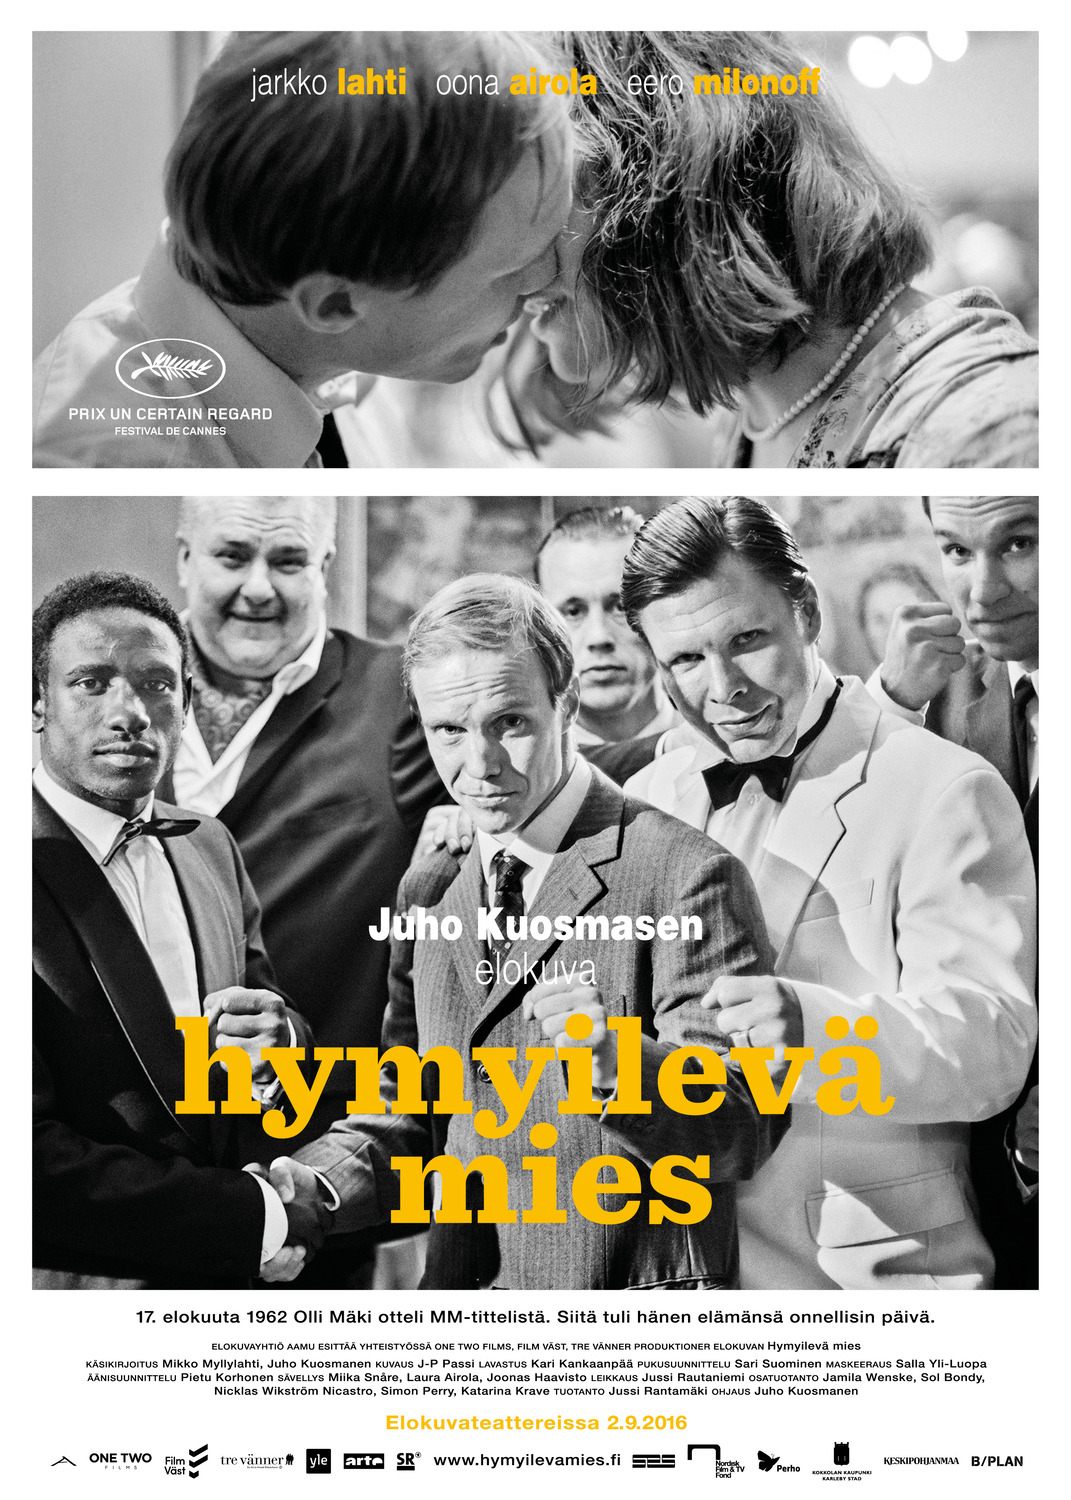 Extra Large Movie Poster Image for Hymyilevä mies 